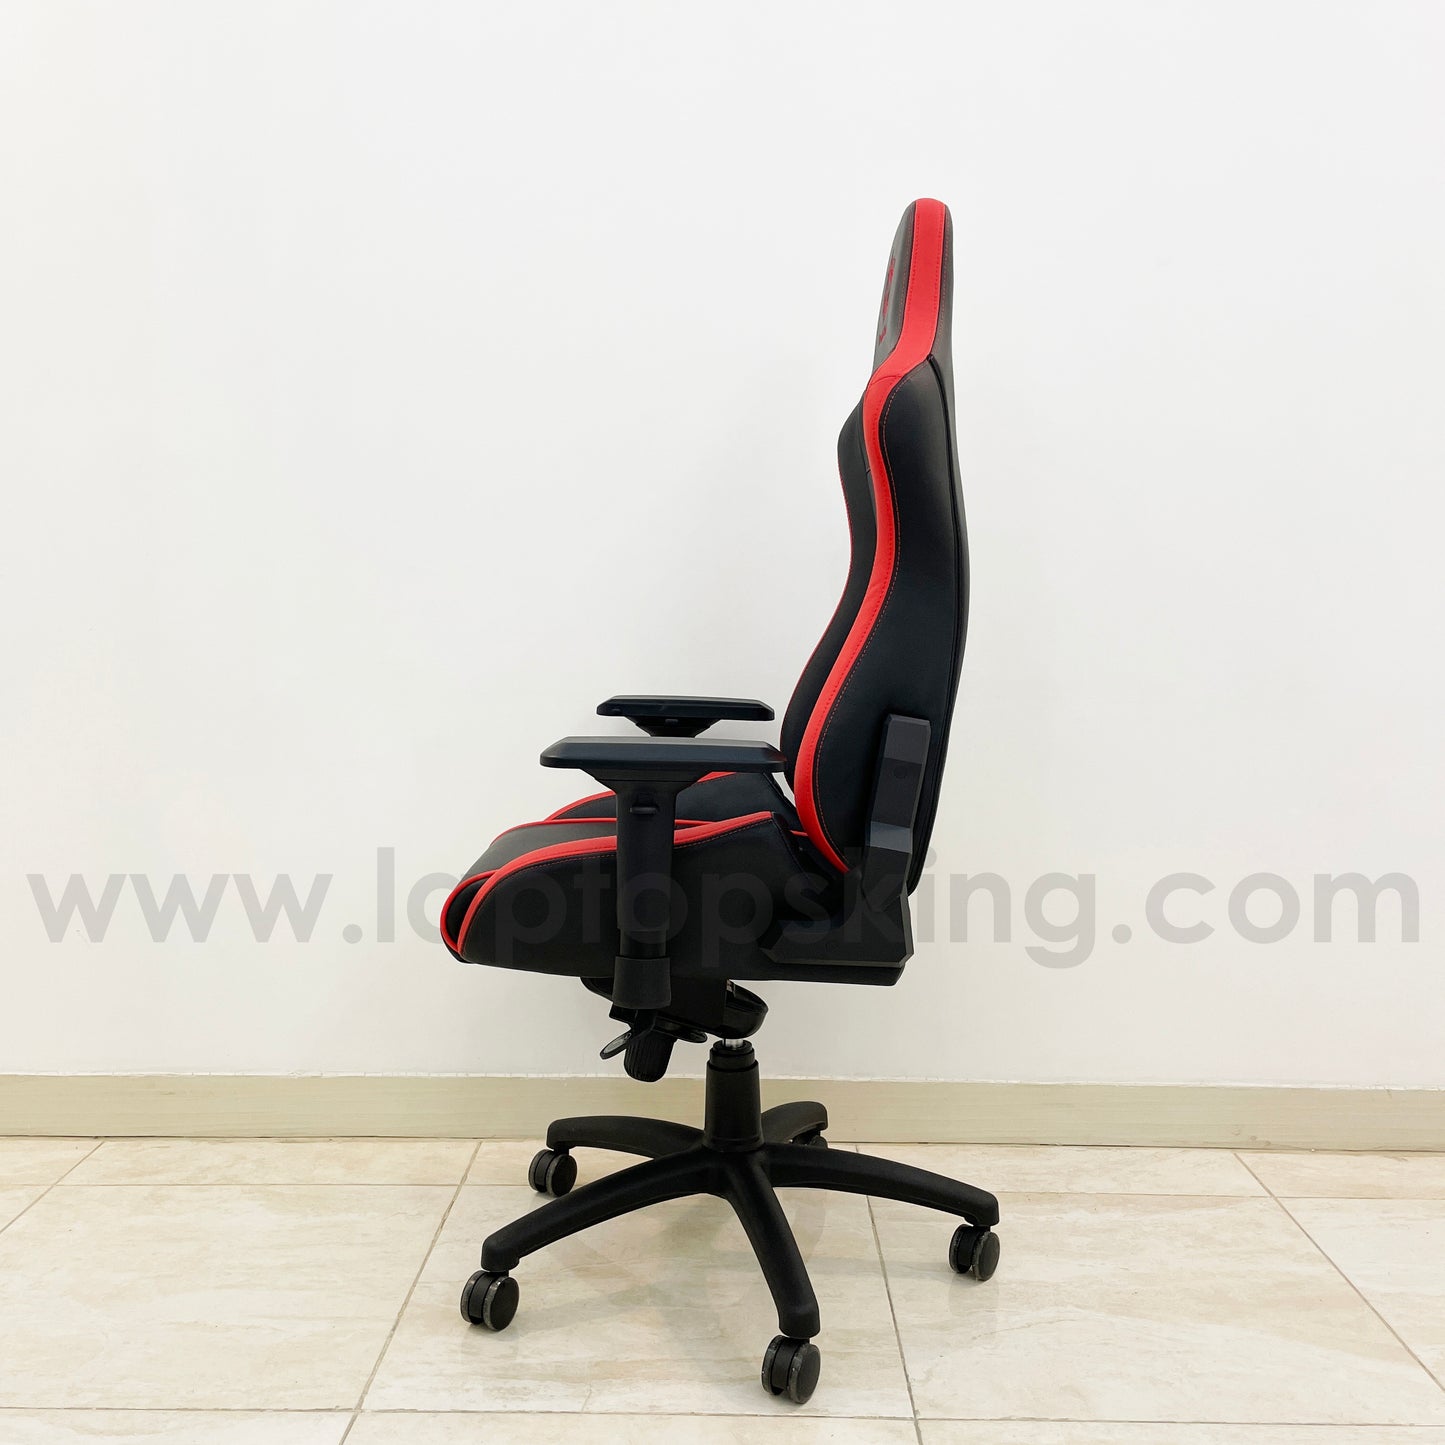 Dragon War DK-868 Red Edition High Quality Gaming Chair Offer (Brand New)